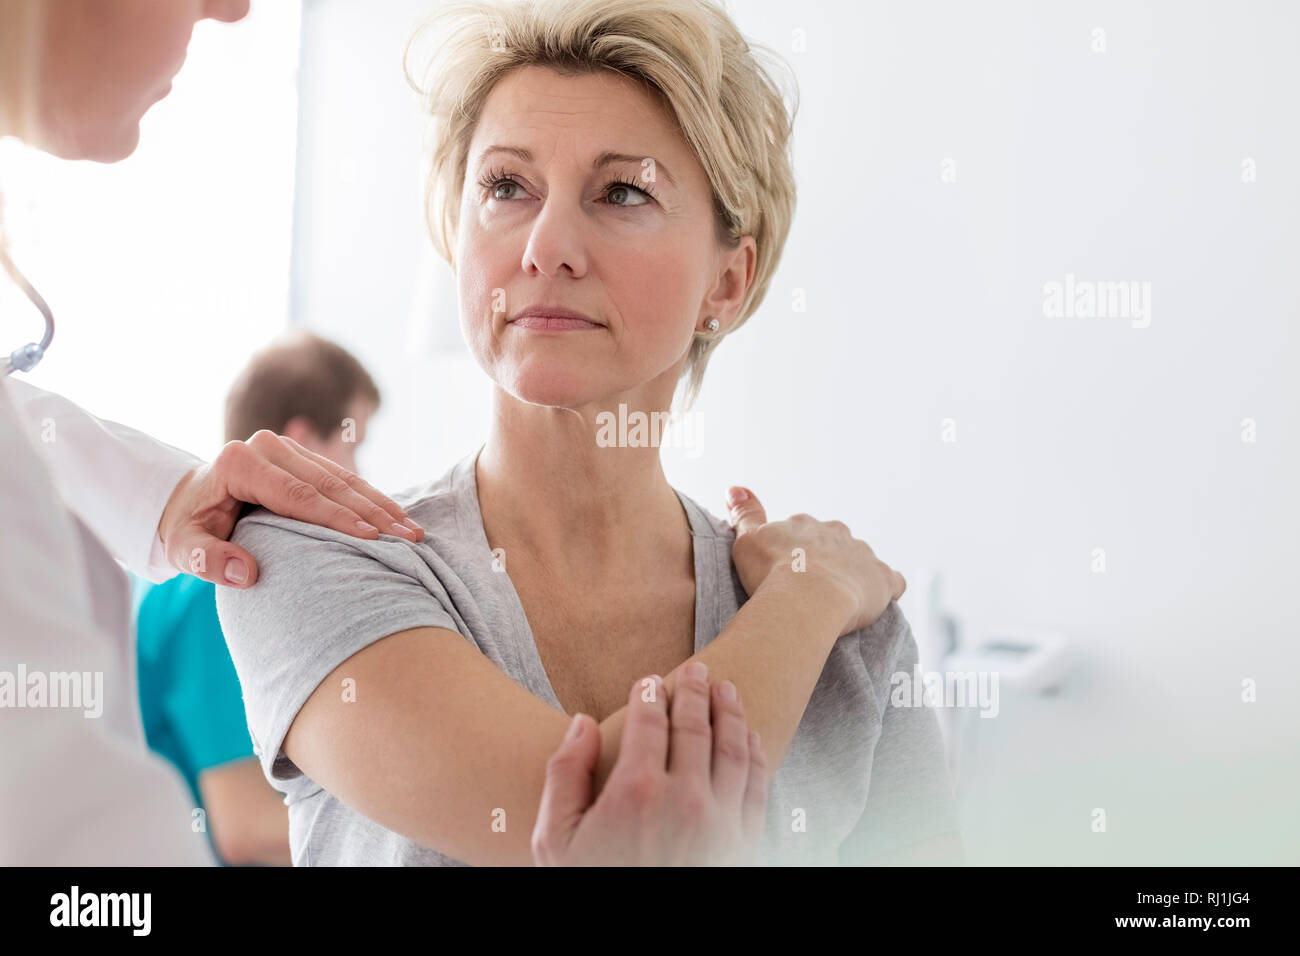 Doctor assisting mature patient in stretching arm at hospital Stock Photo